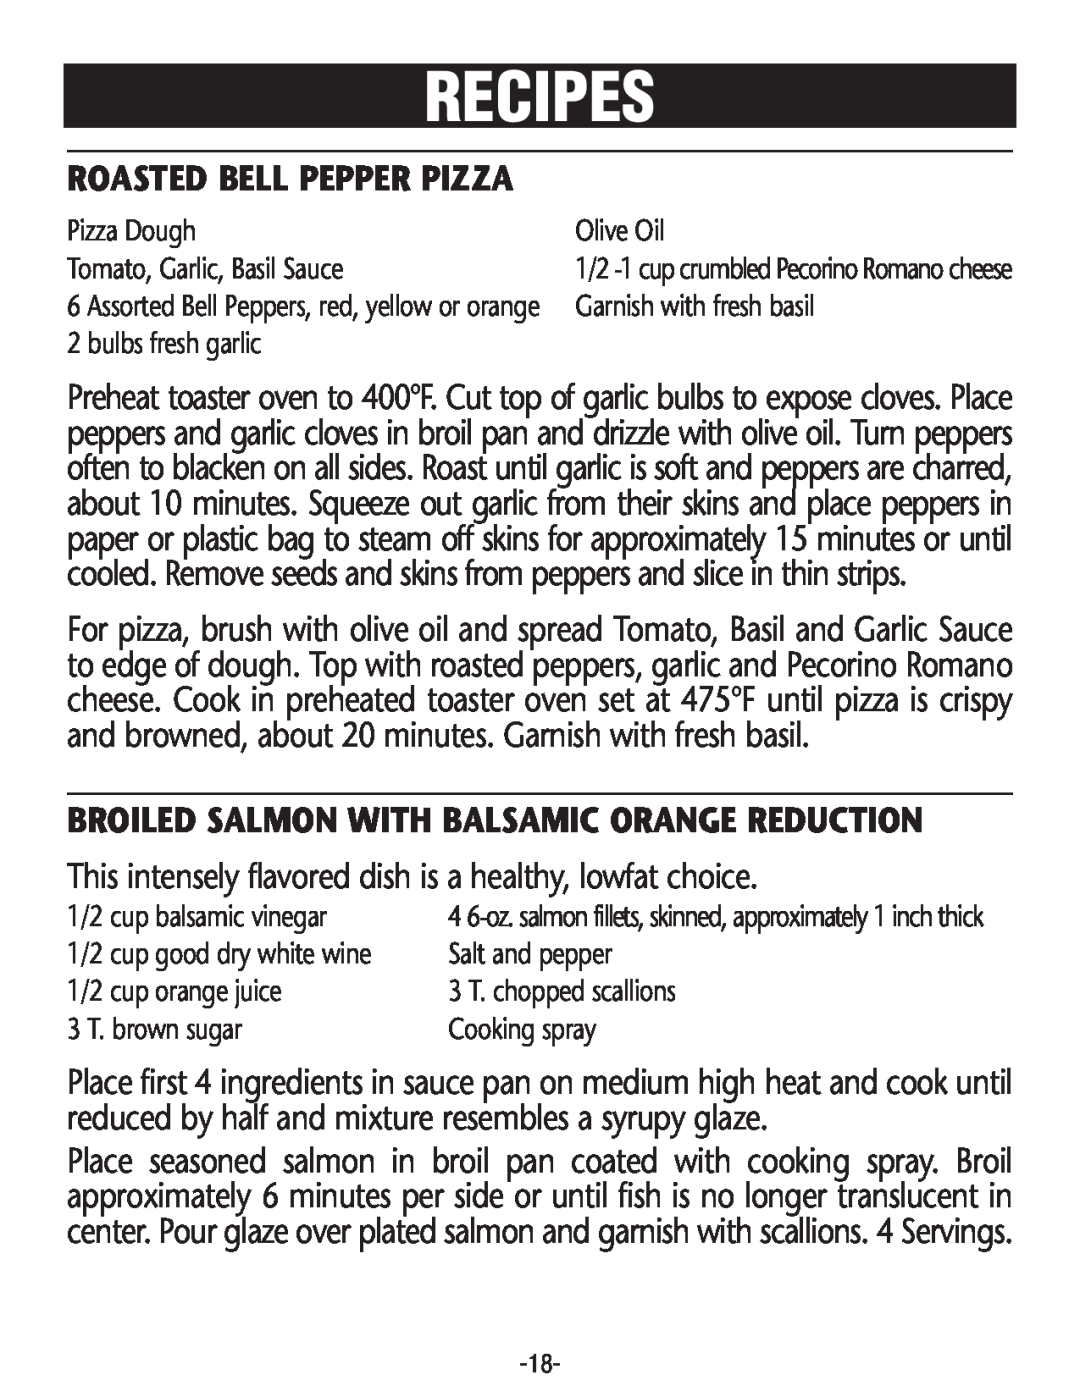 Rival CO606 manual Roasted Bell Pepper Pizza, Broiled Salmon With Balsamic Orange Reduction, Recipes 